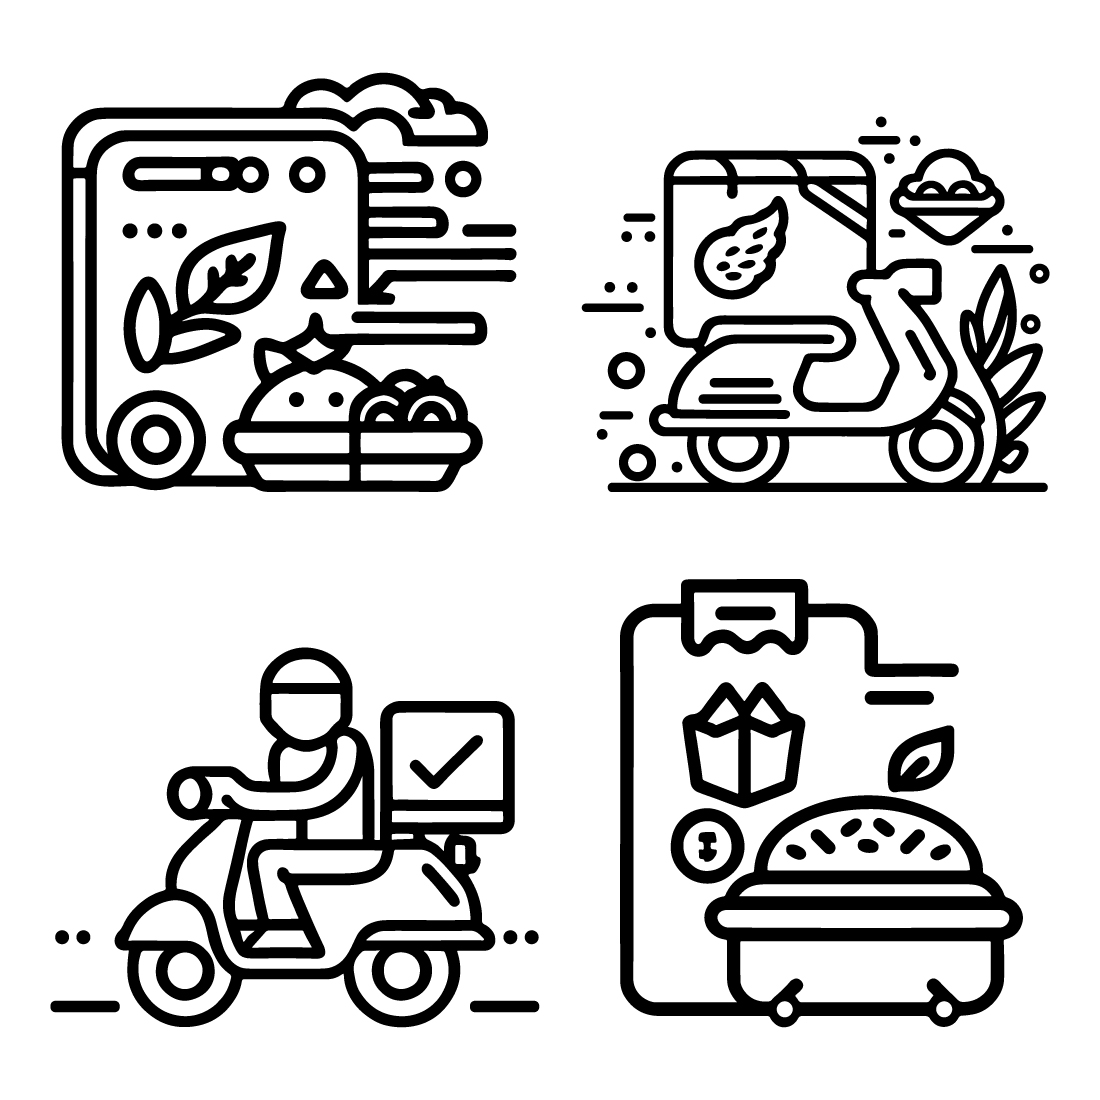 Food Delivery Icon set, line art Black And White food delivery service vector icons, Outline style, and a clean simple design isolated on white background preview image.